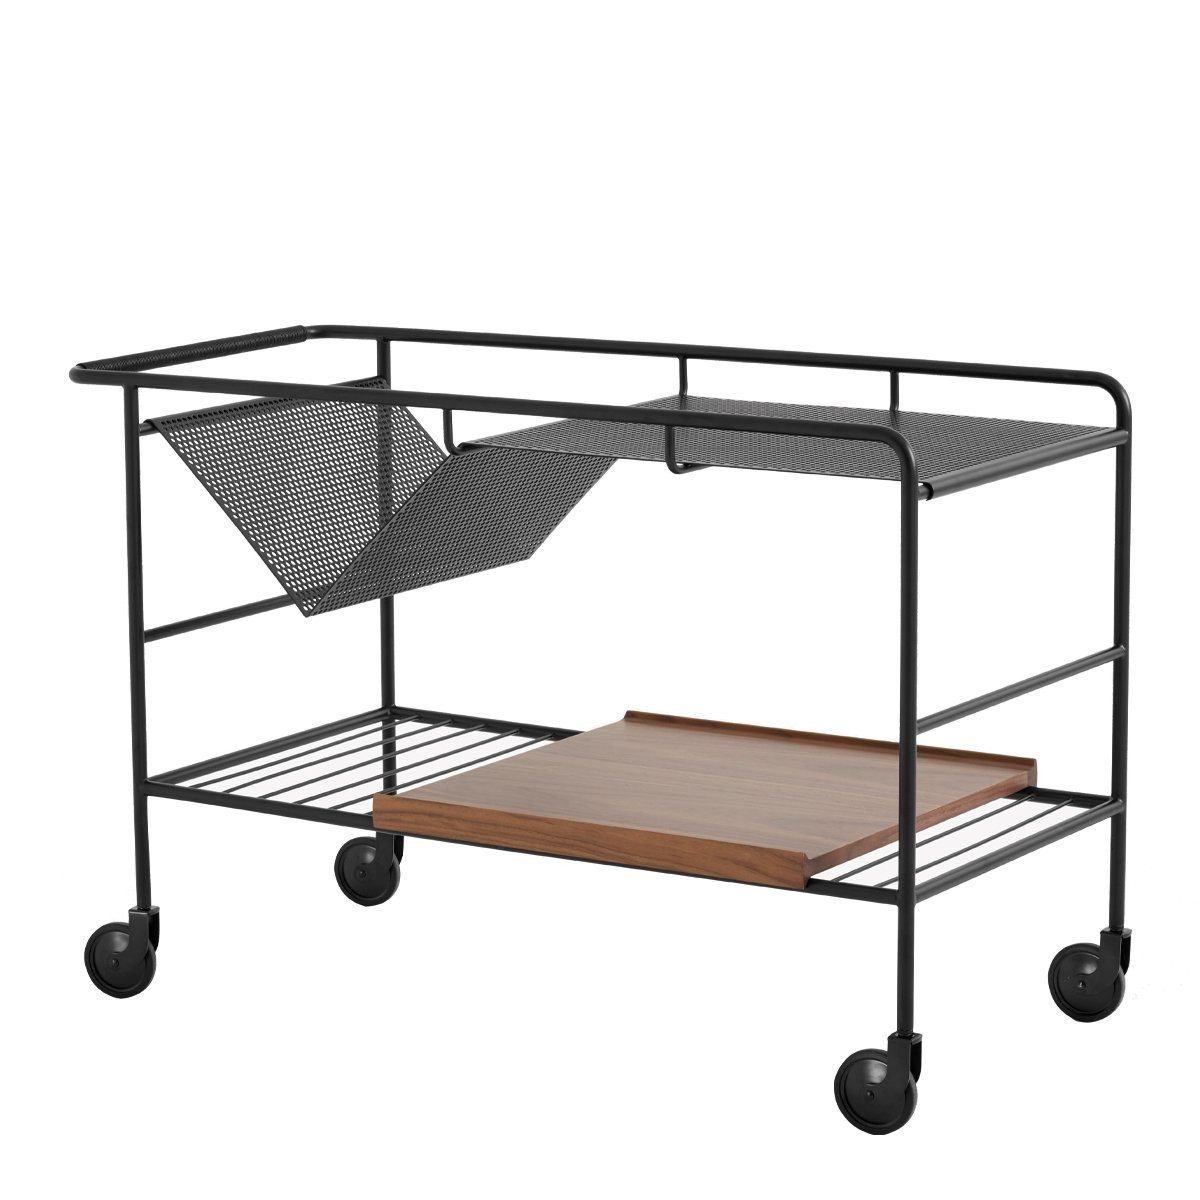 &Tradition Alima NDS1 Trolley